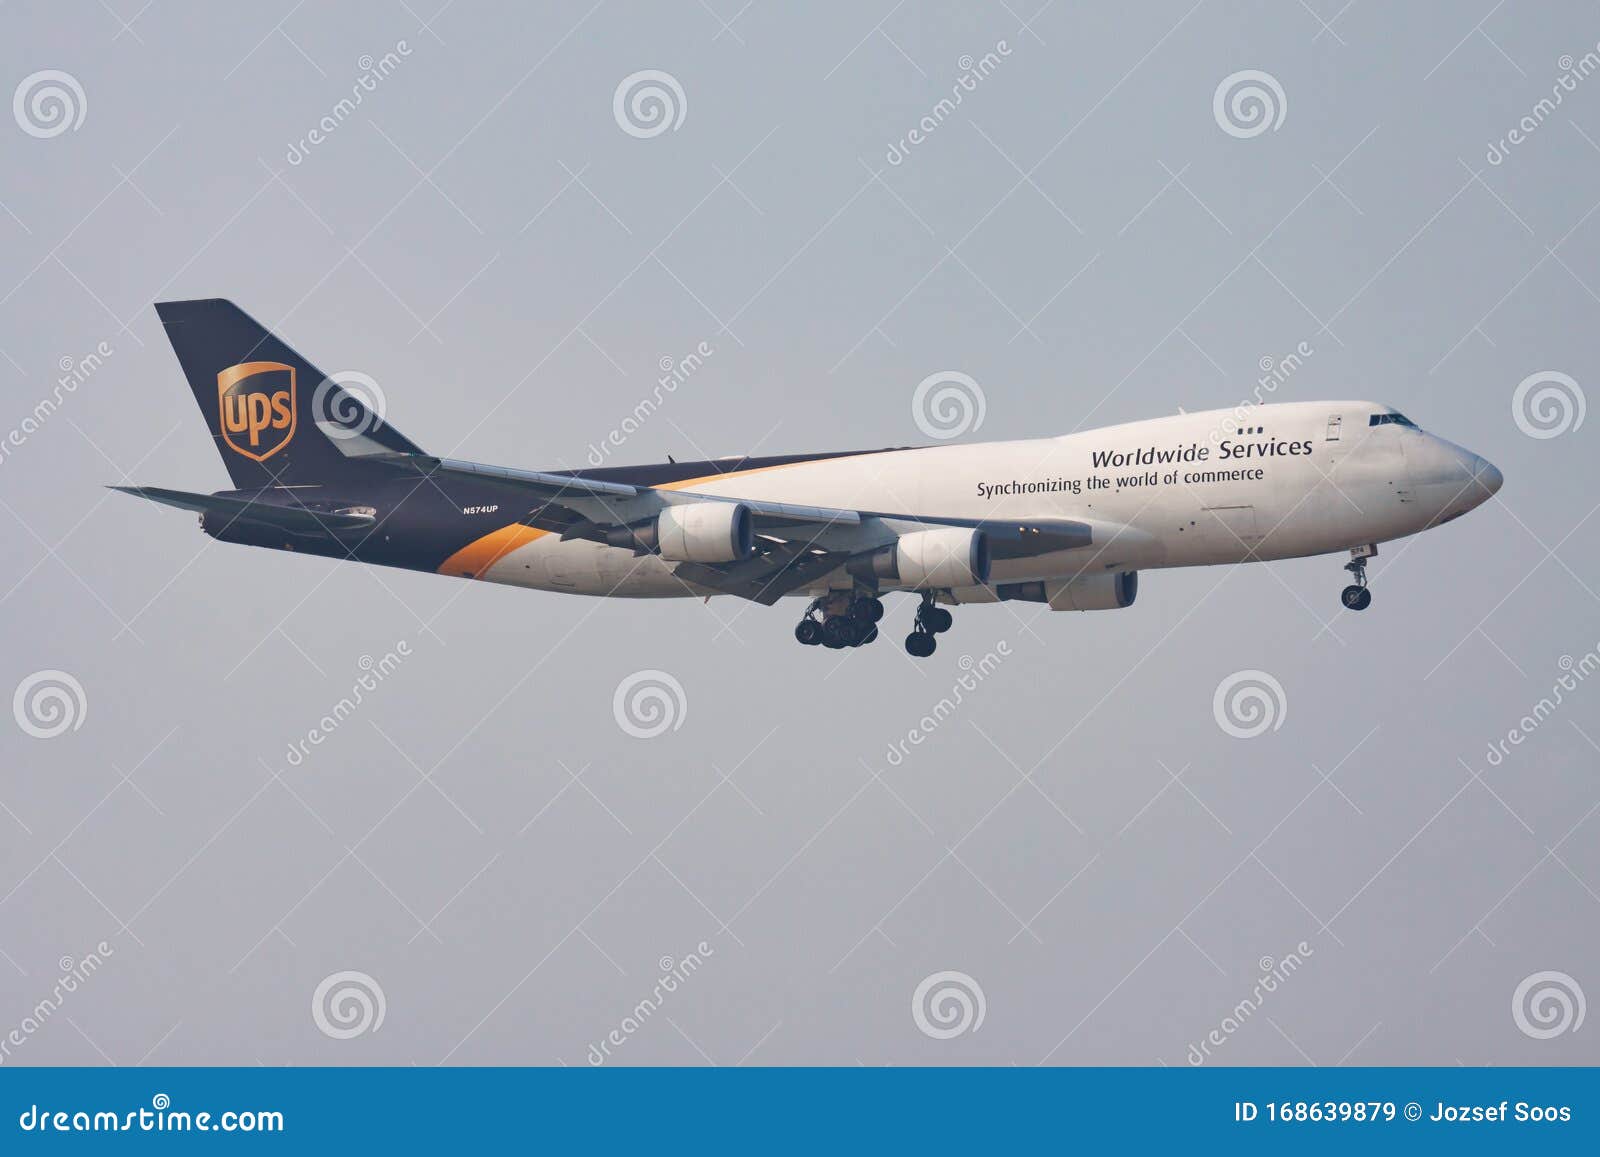 ups airlines boeing 747 400 n574up cargo plane arrival and landing at hong kong chek lap kok airport editorial stock image image of kong airliner 168639879